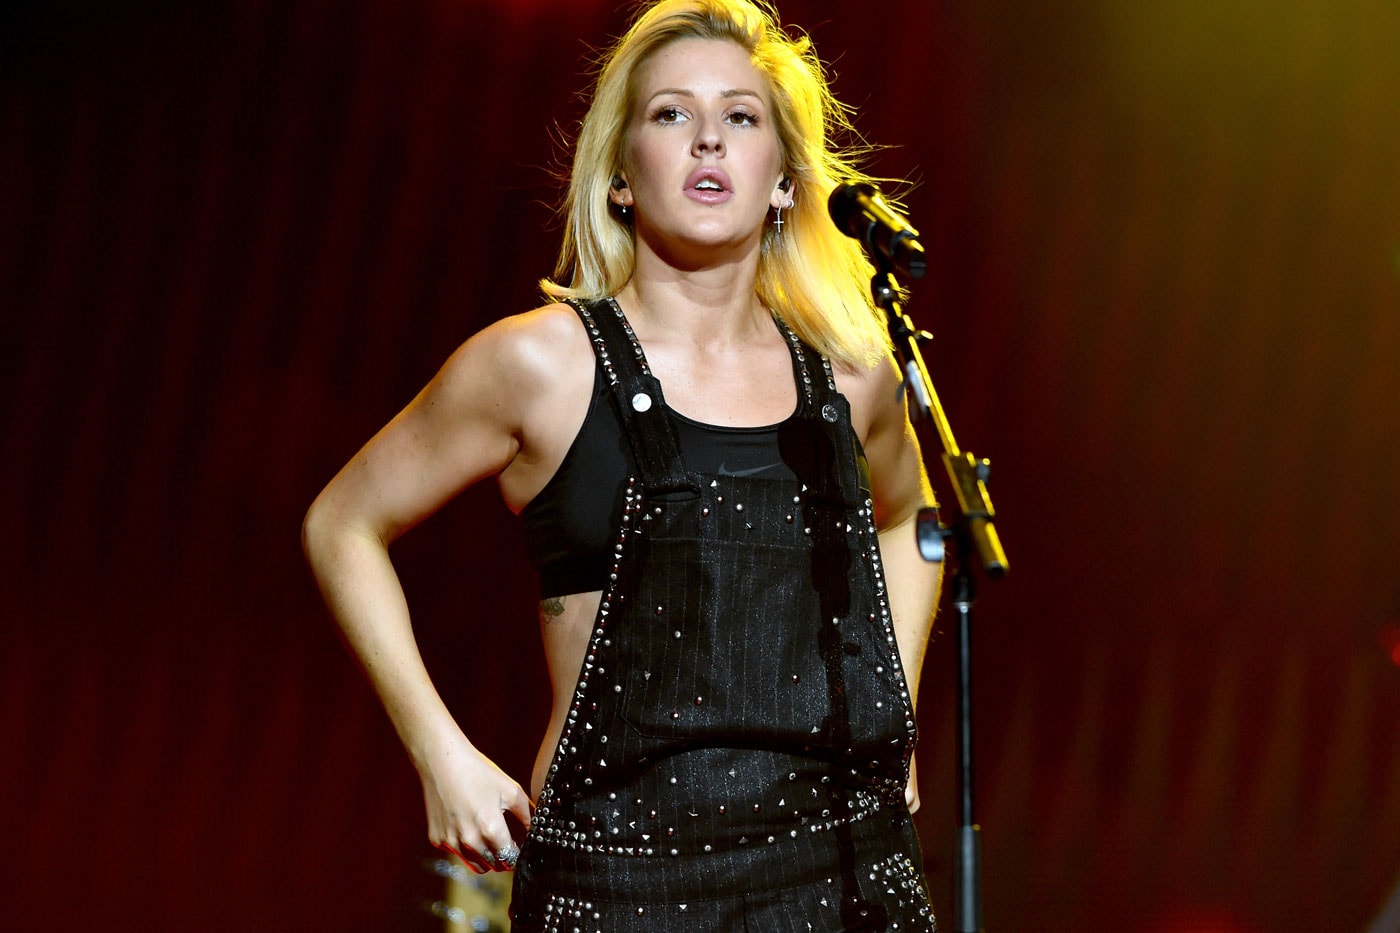 Preview Ellie Goulding's Max Martin-Produced Single "On My Mind"